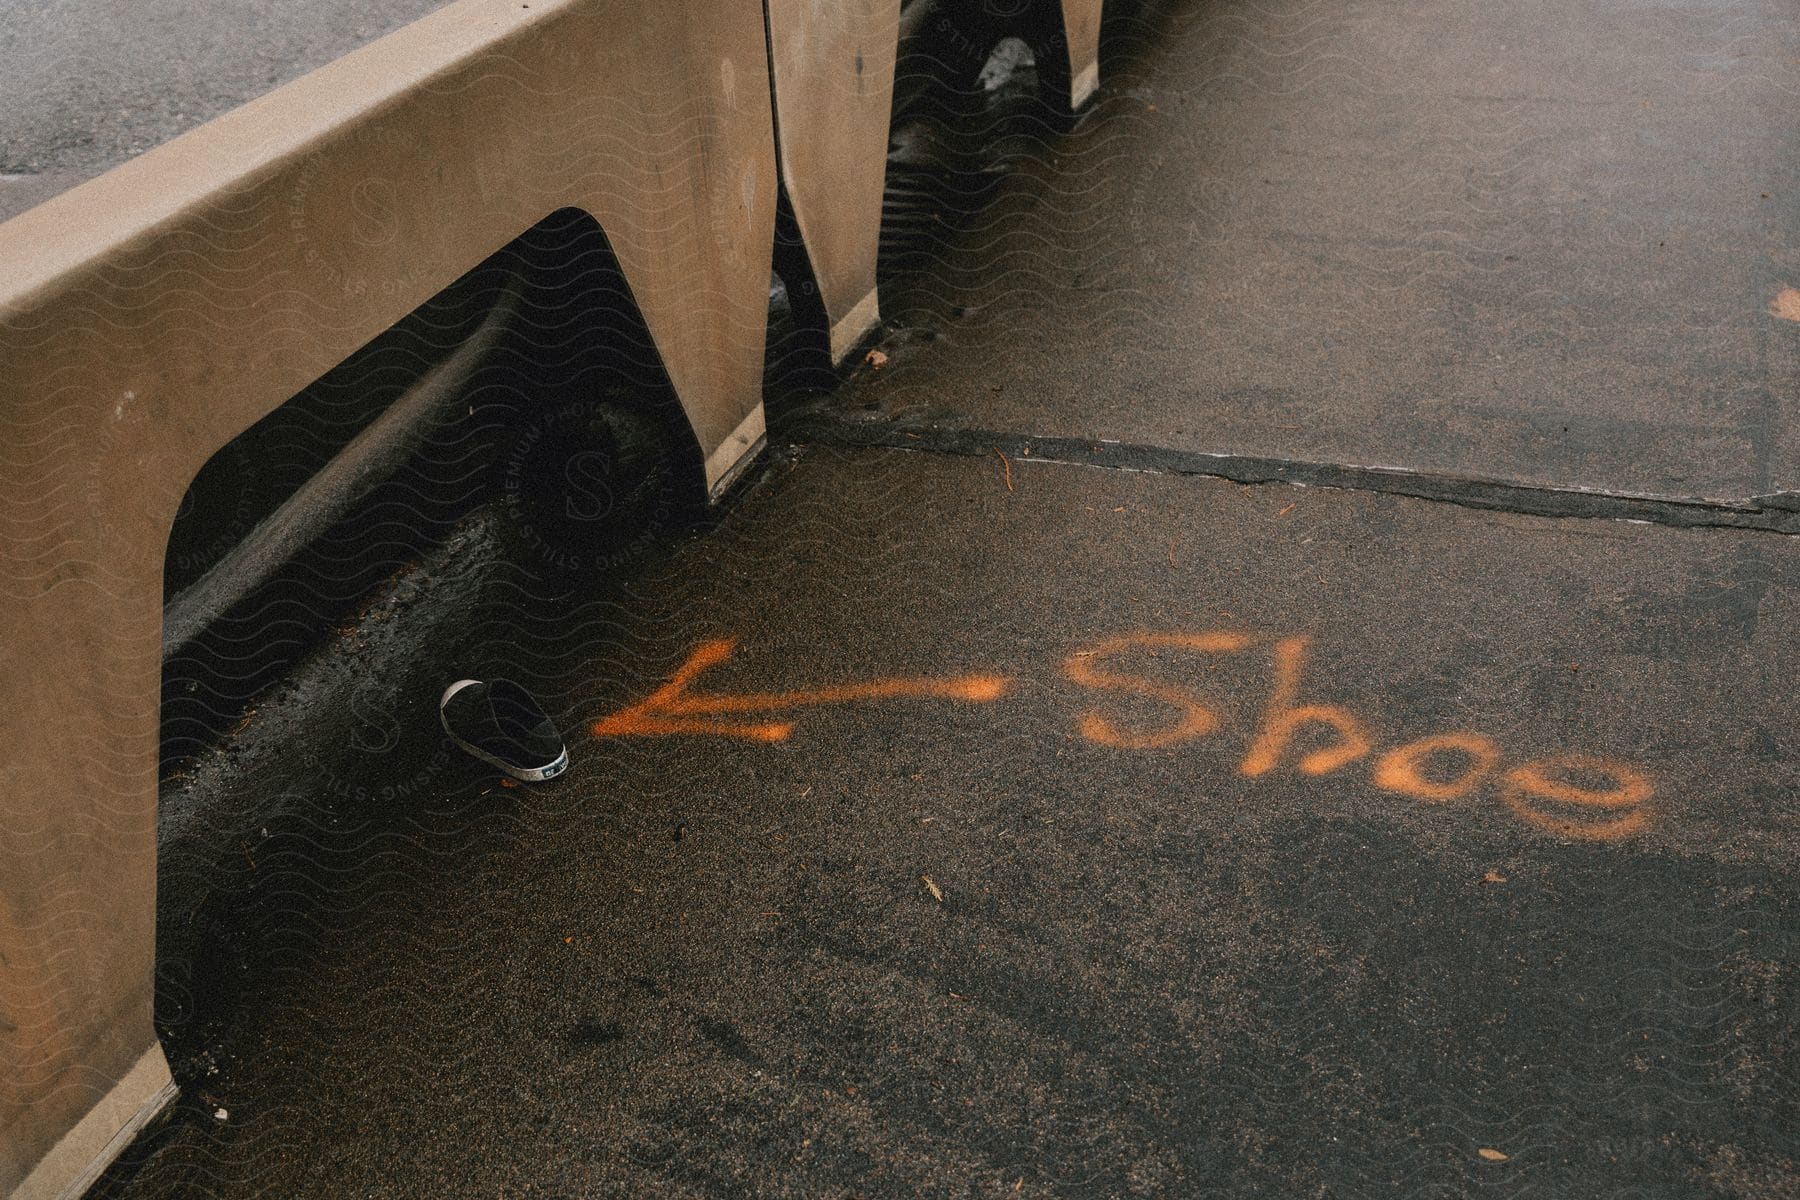 A single shoe near a barrier on wet pavement with the word “Shoe” spray-painted next to it